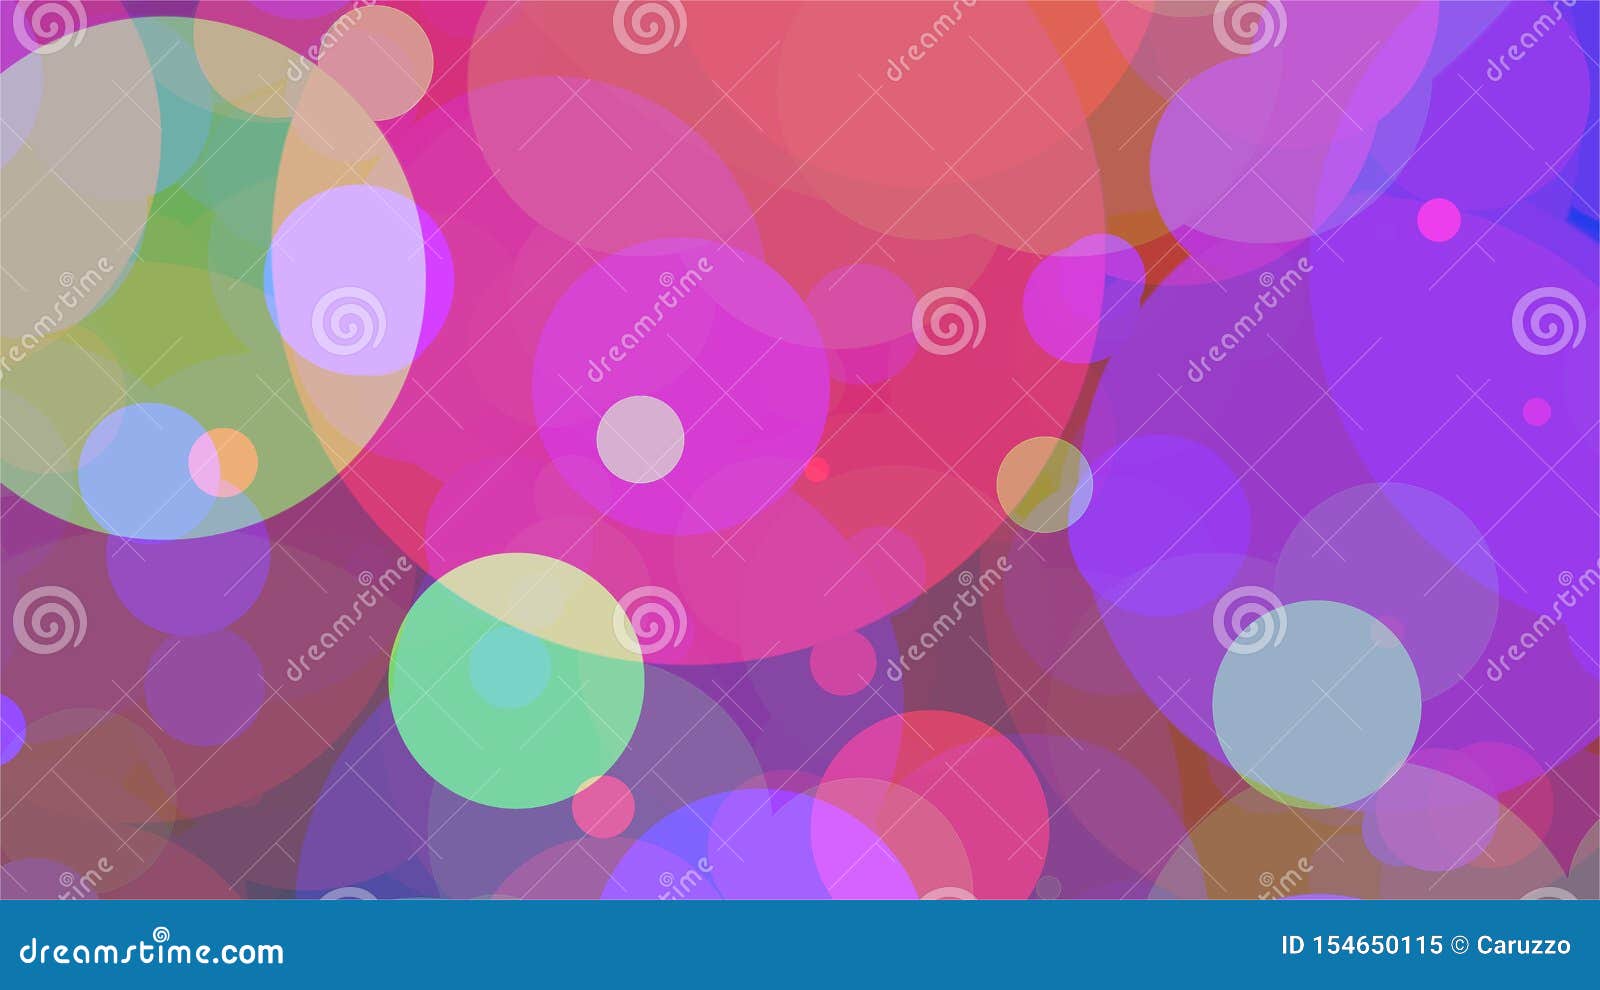 Abstract Wallpaper, Colored Composition, High Resolution 8k Stock  Illustration - Illustration of design, blur: 154650115